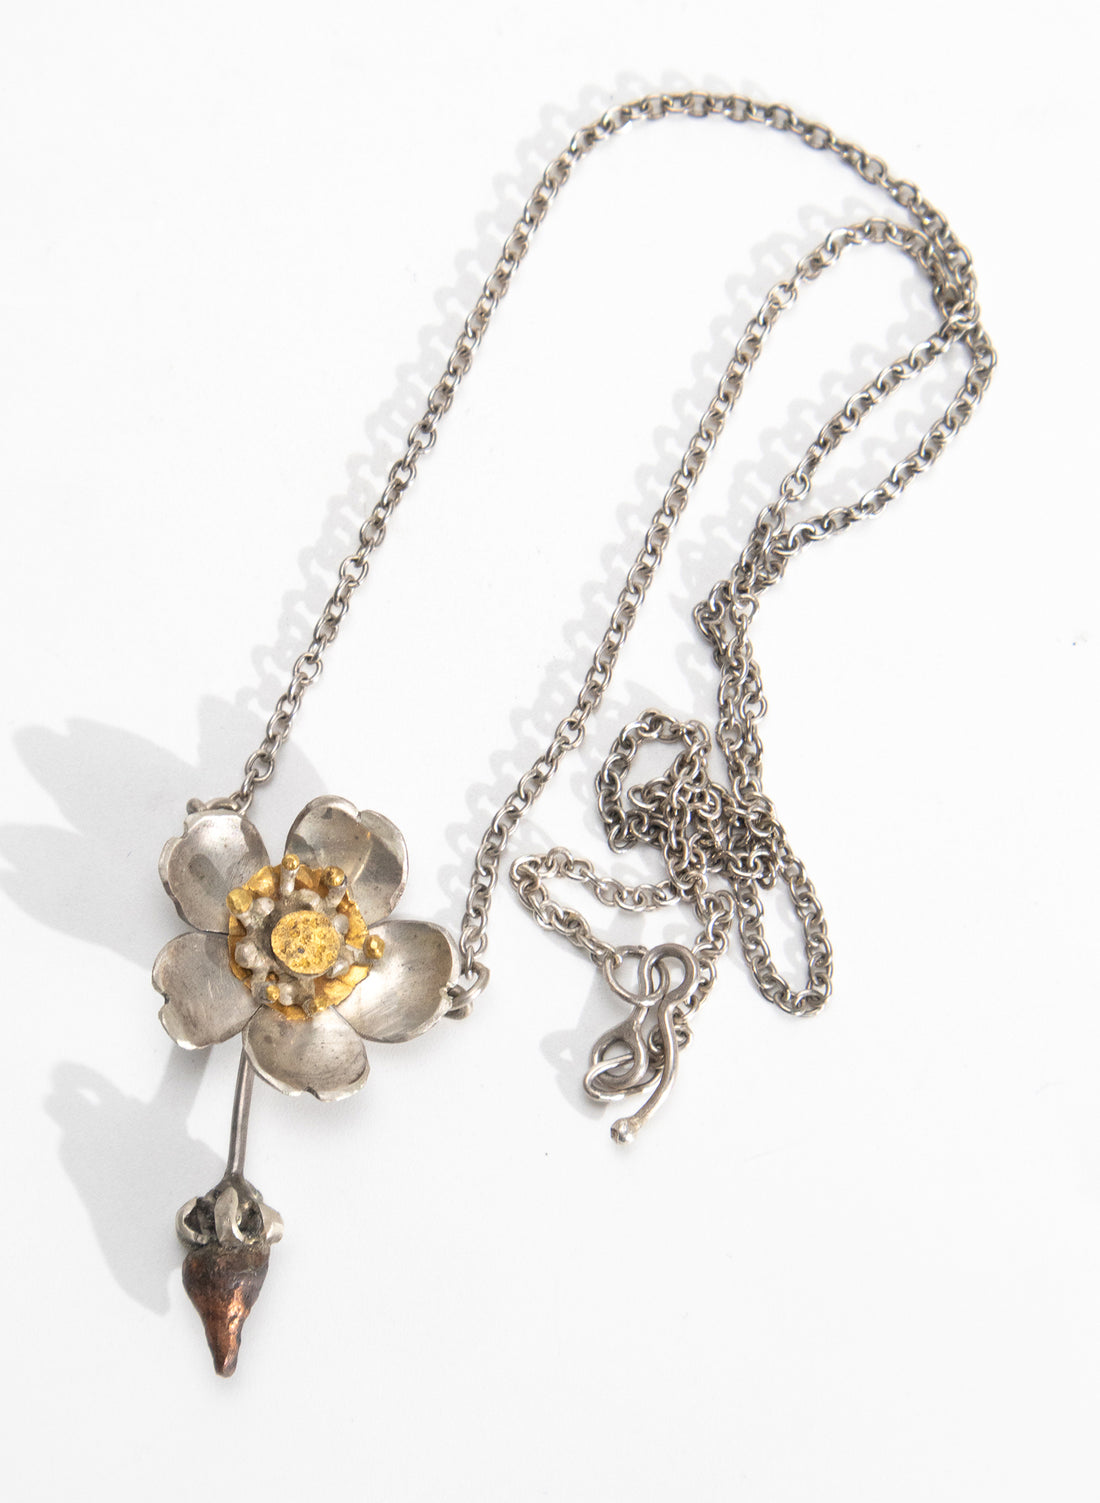 Rosa 24ct Gold, Sterling Silver Necklace